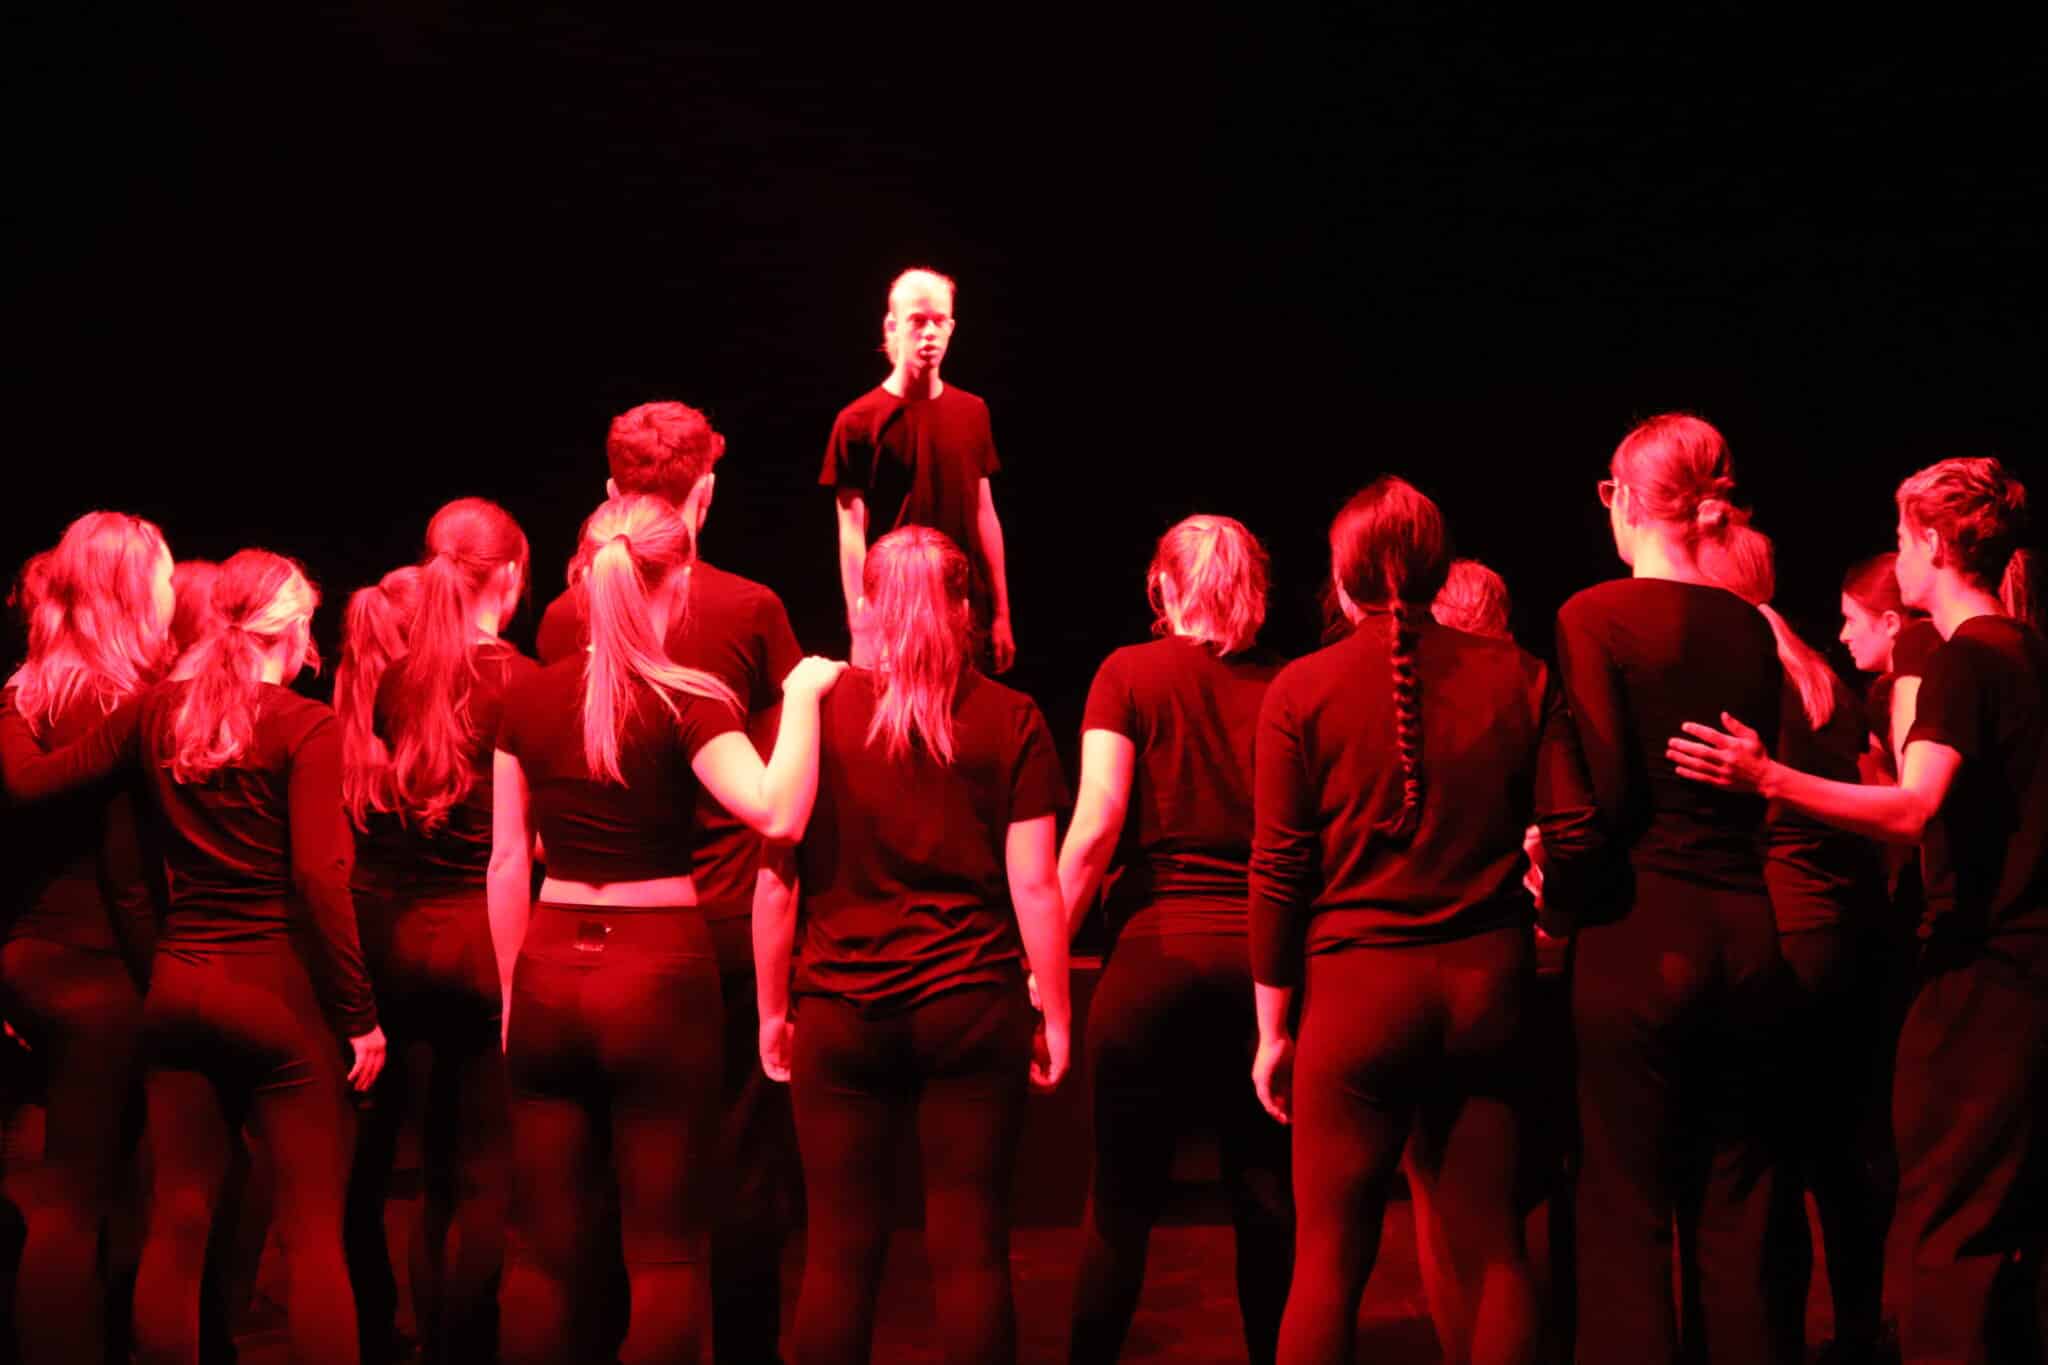 Performing Arts students complete first shows in newly refurbished theatres - Musical Theatre show